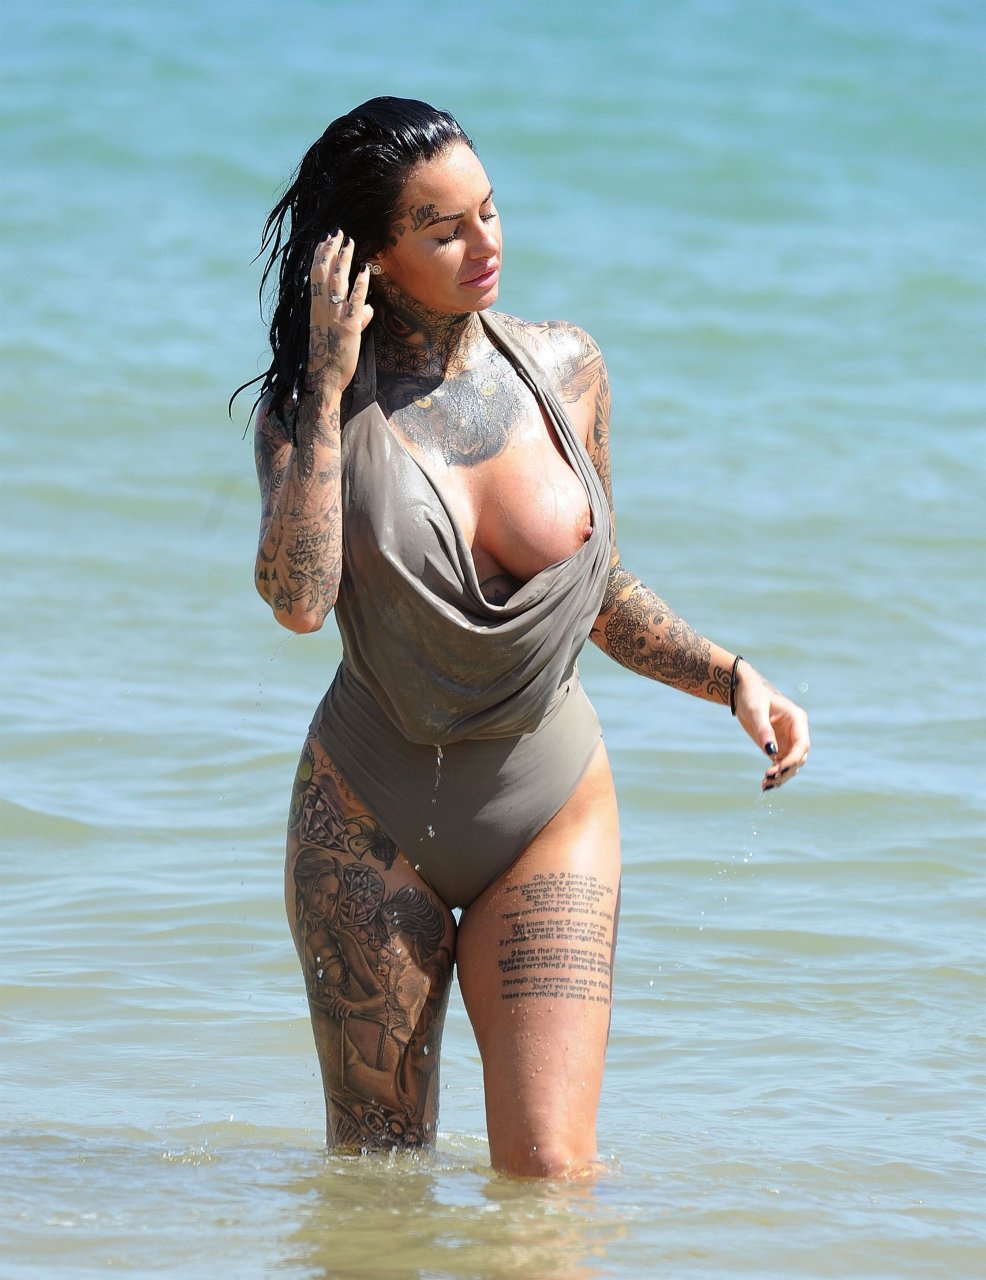 Jemma Lucy suffered a wardrobe malfunction on the beach in Cyprus